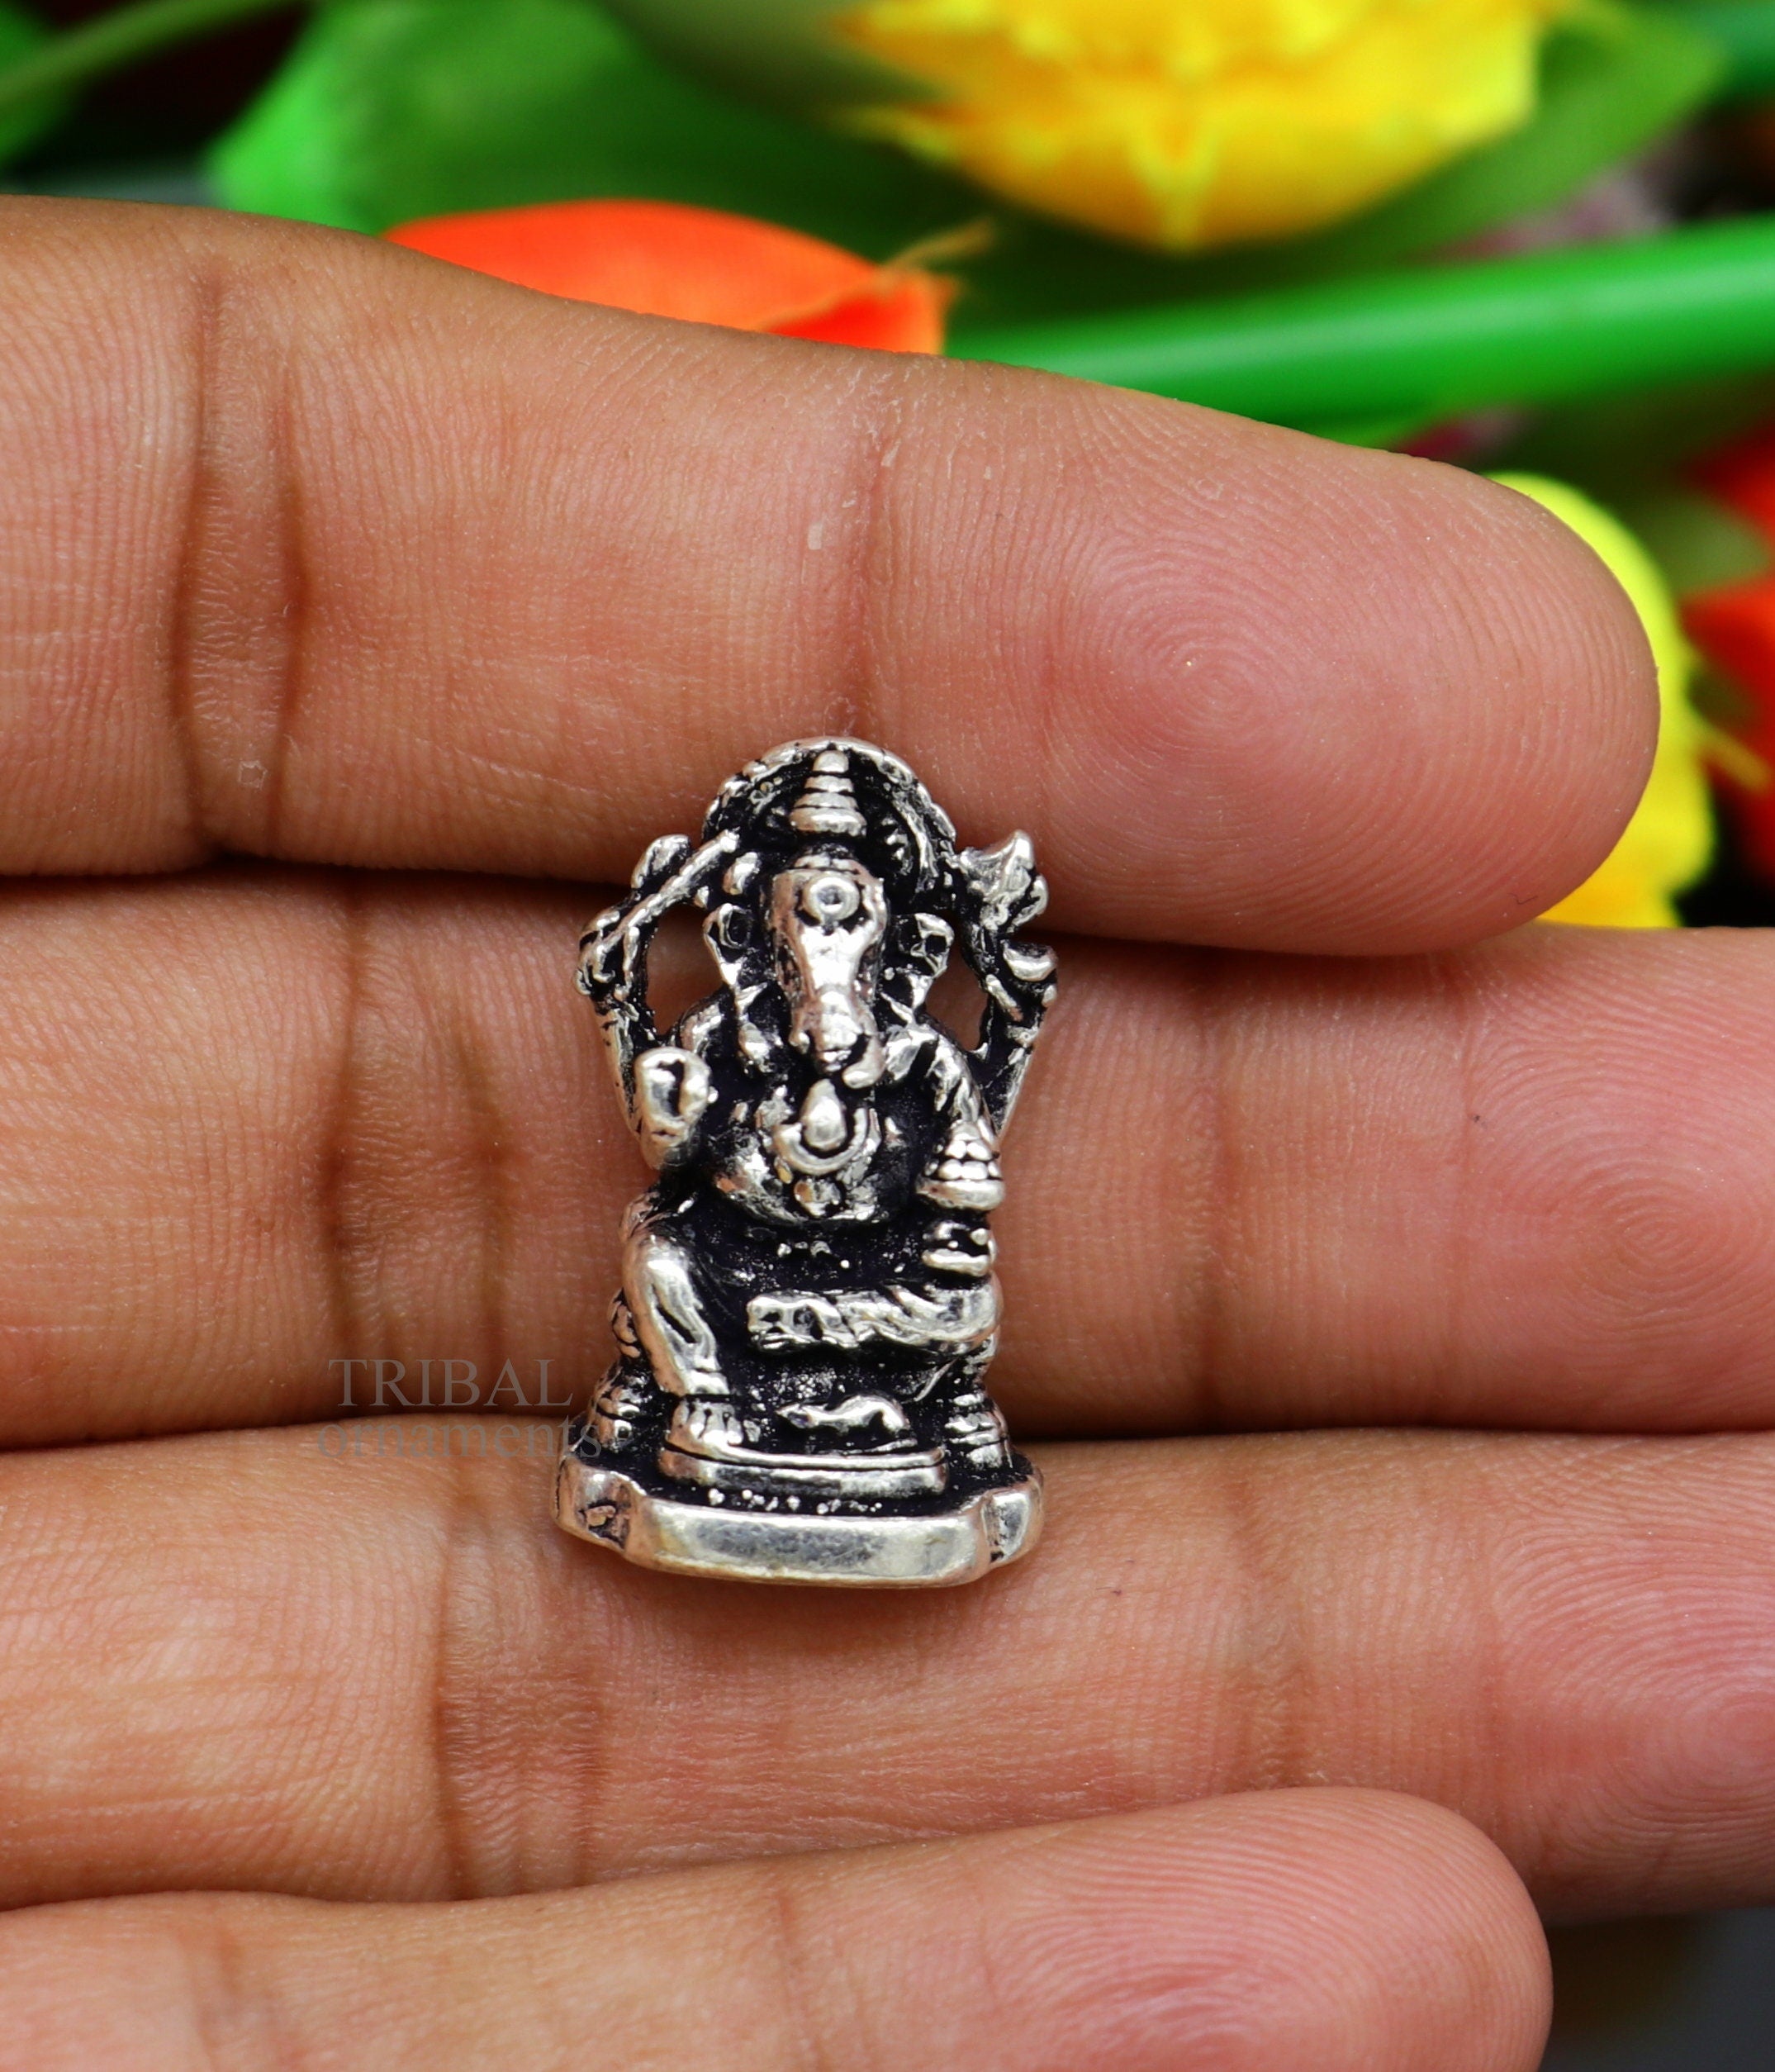 Ganesh Ring 925 Sterling Silver Great Ganesha 4 Hands Lord of Success  Wealth Wisdom Ohm Aum Talisman Amulet Good Luck Om Symbol Maruti Mouse -  ELIZ Jewelry and Gems